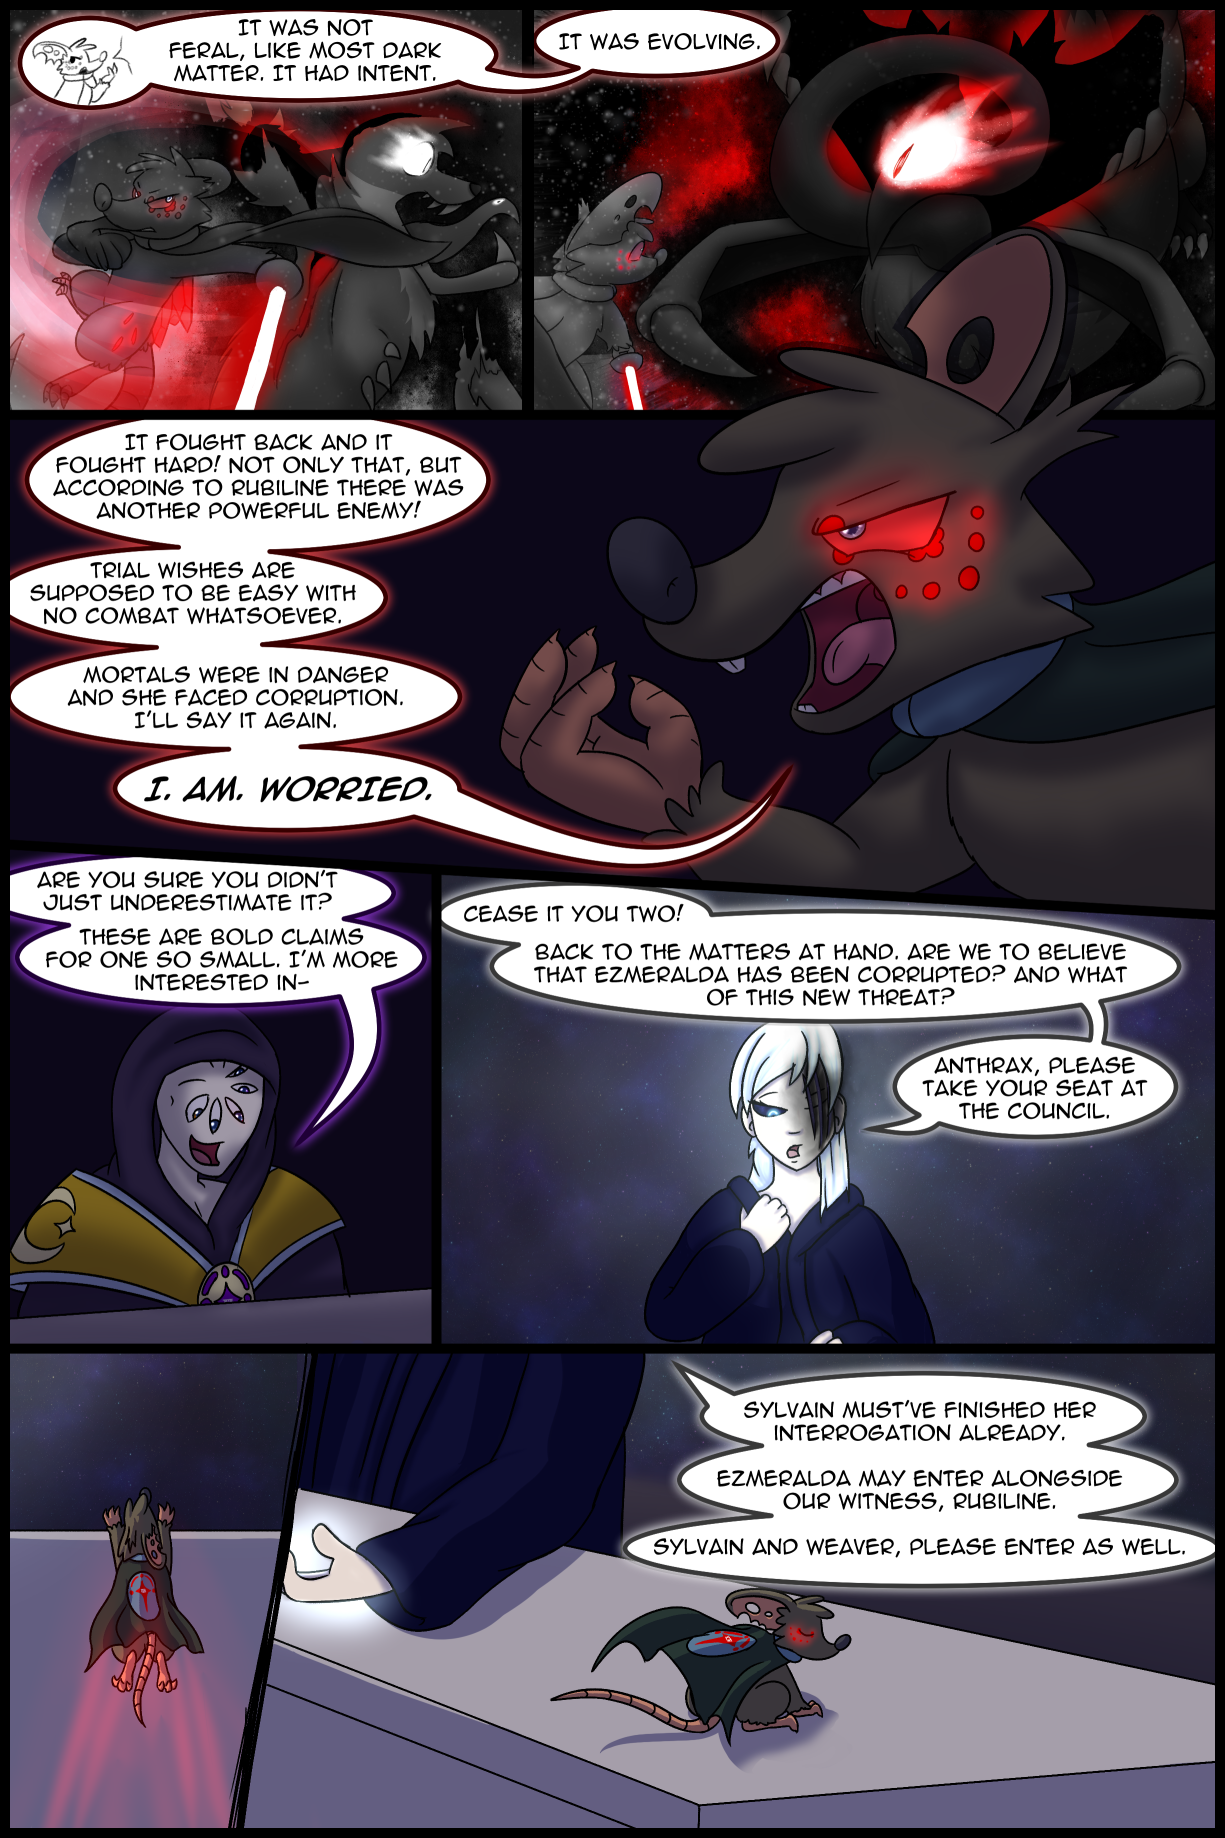 Ch4 Page 10 – Evolving